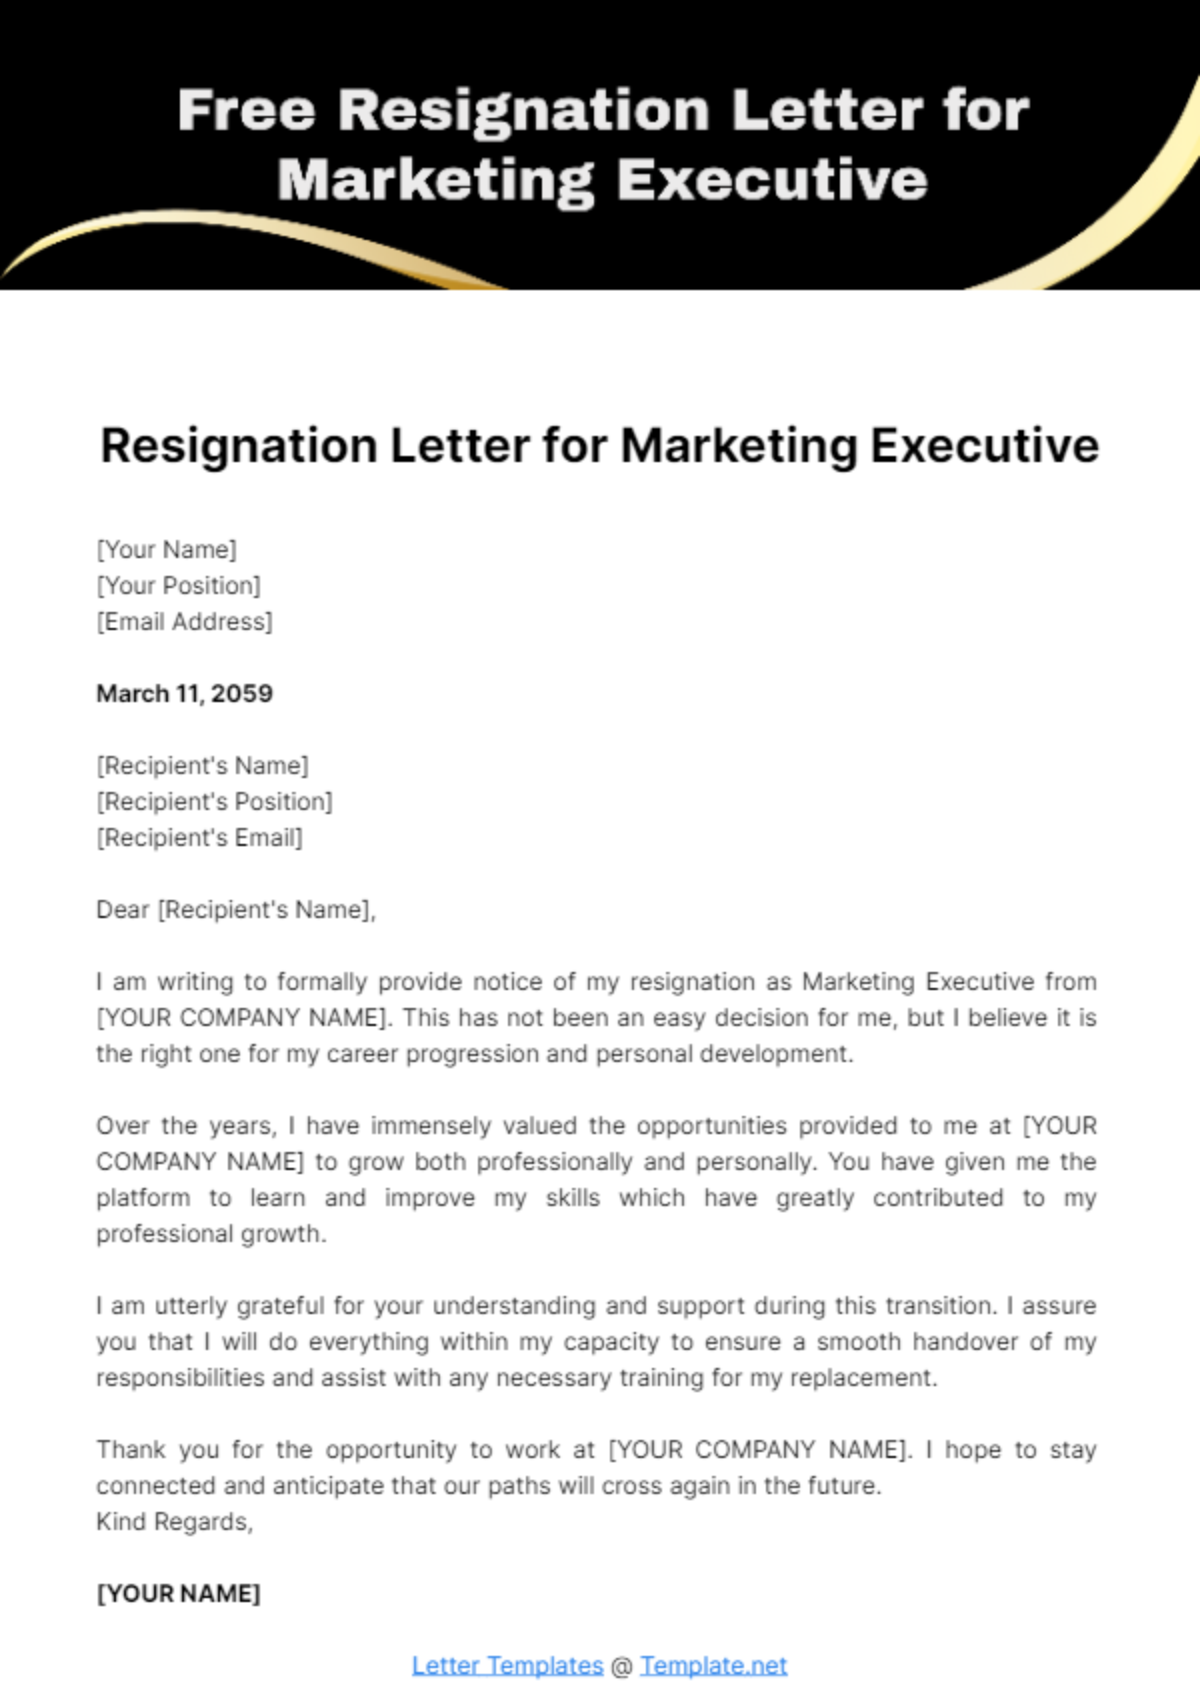 Resignation Letter for Marketing Executive Template